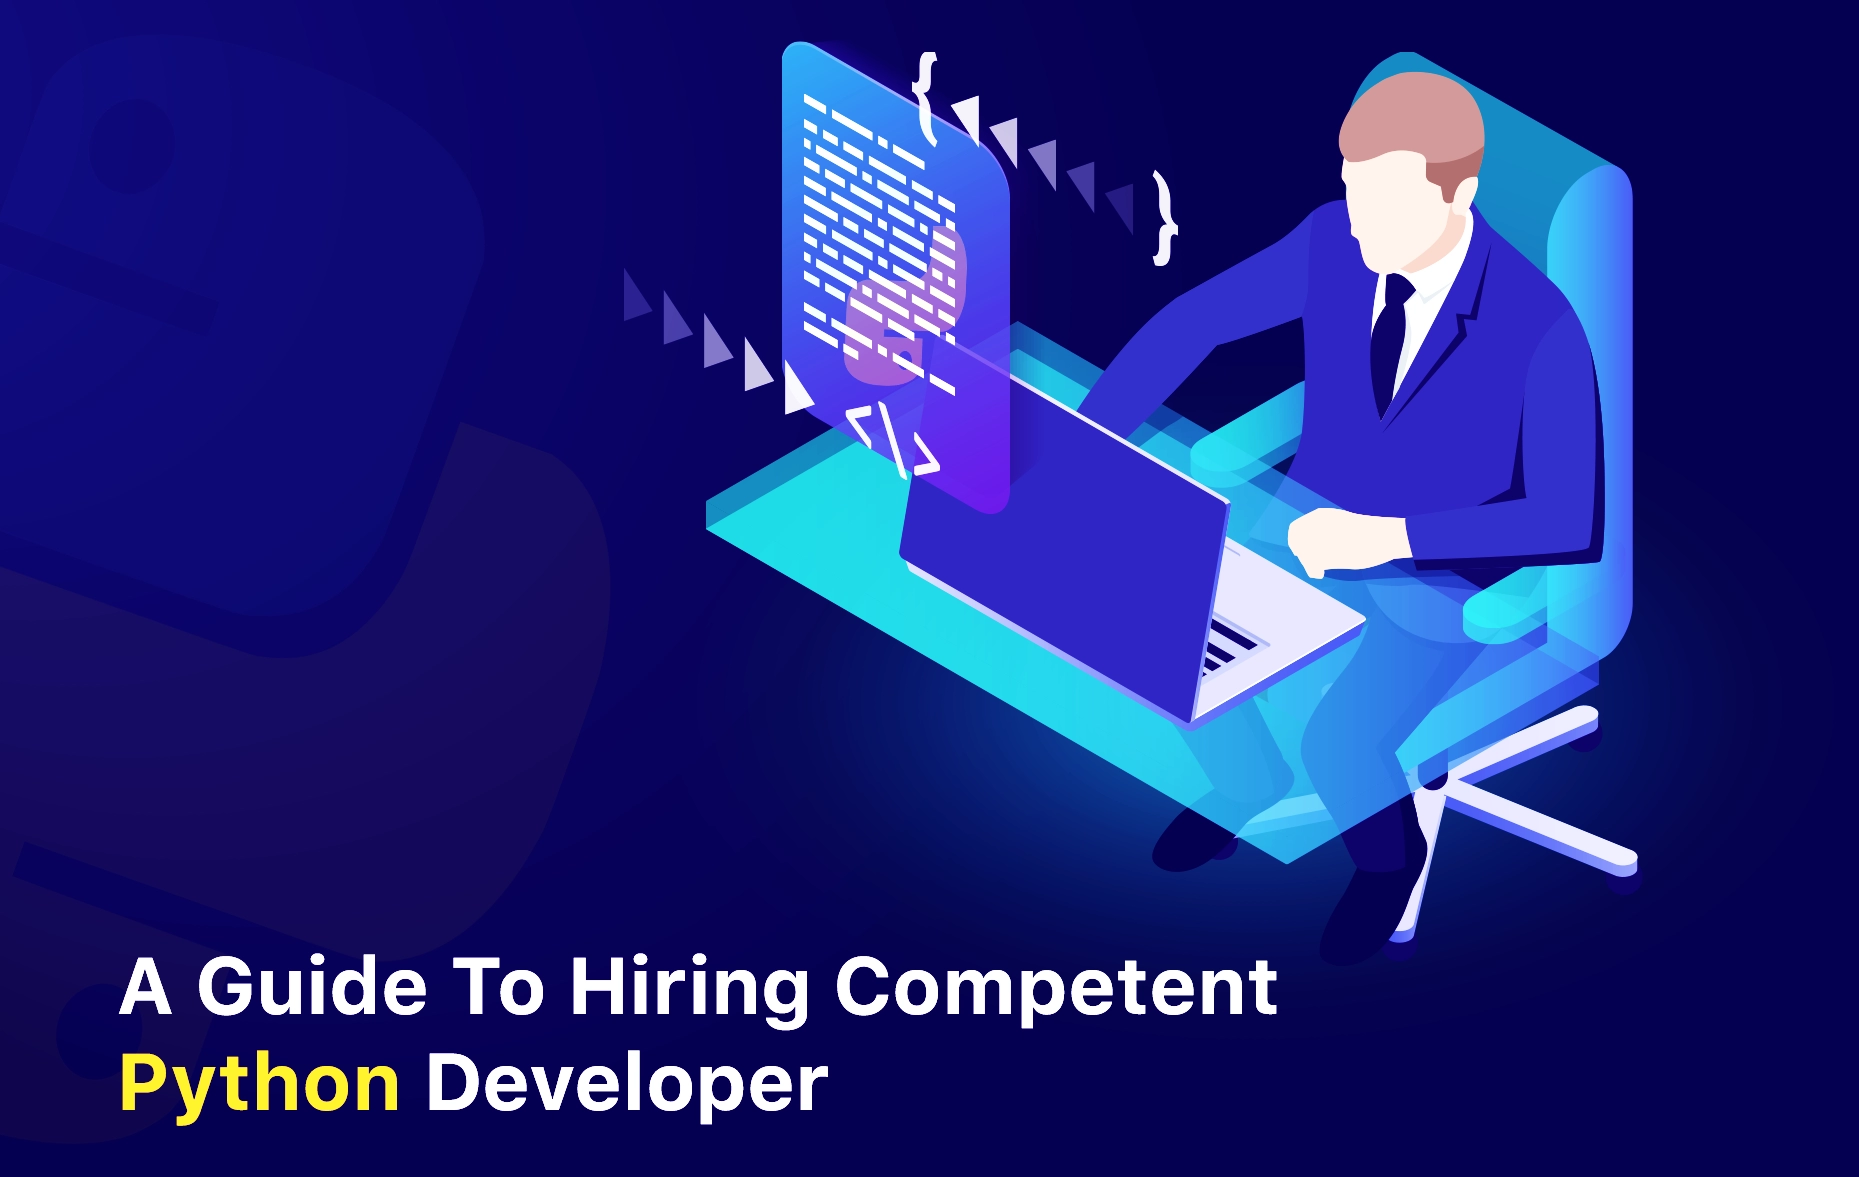 A guide to hiring competent Python developer